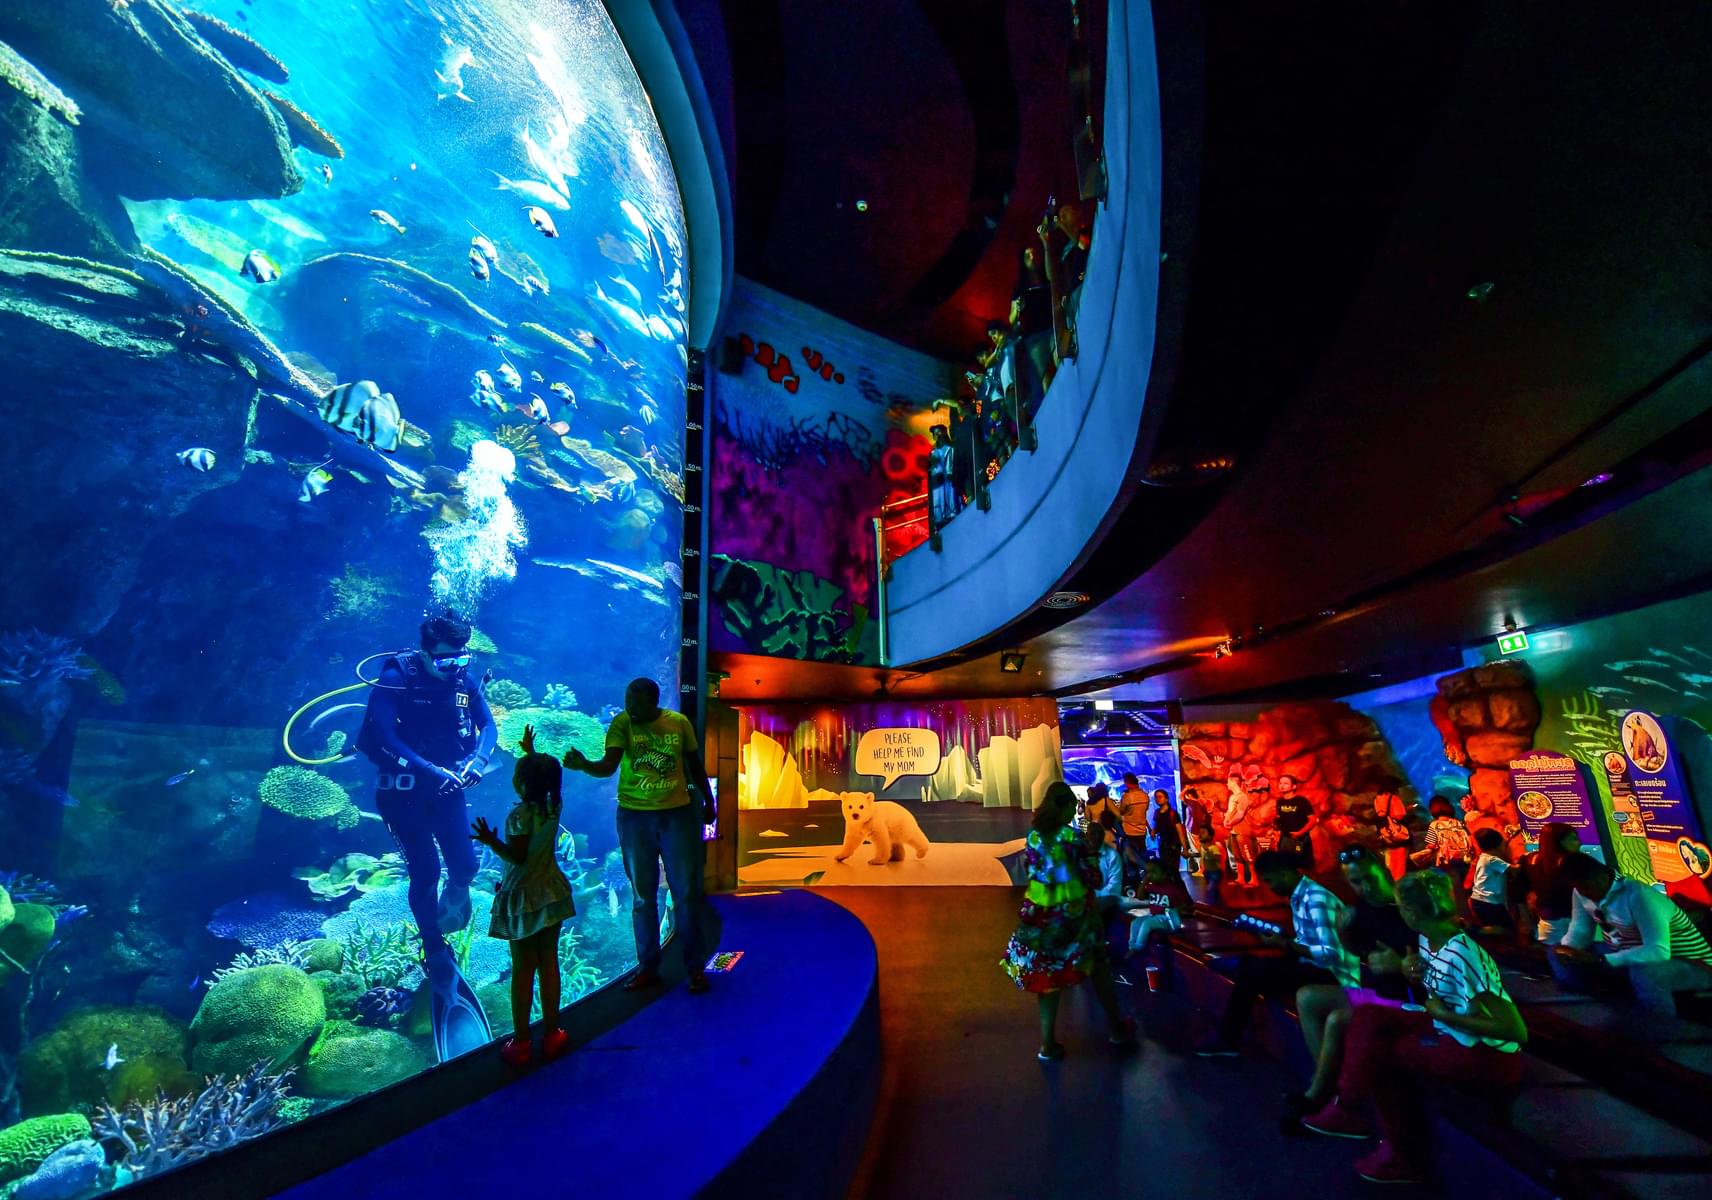 Observe the colorful marine world through the glass walls